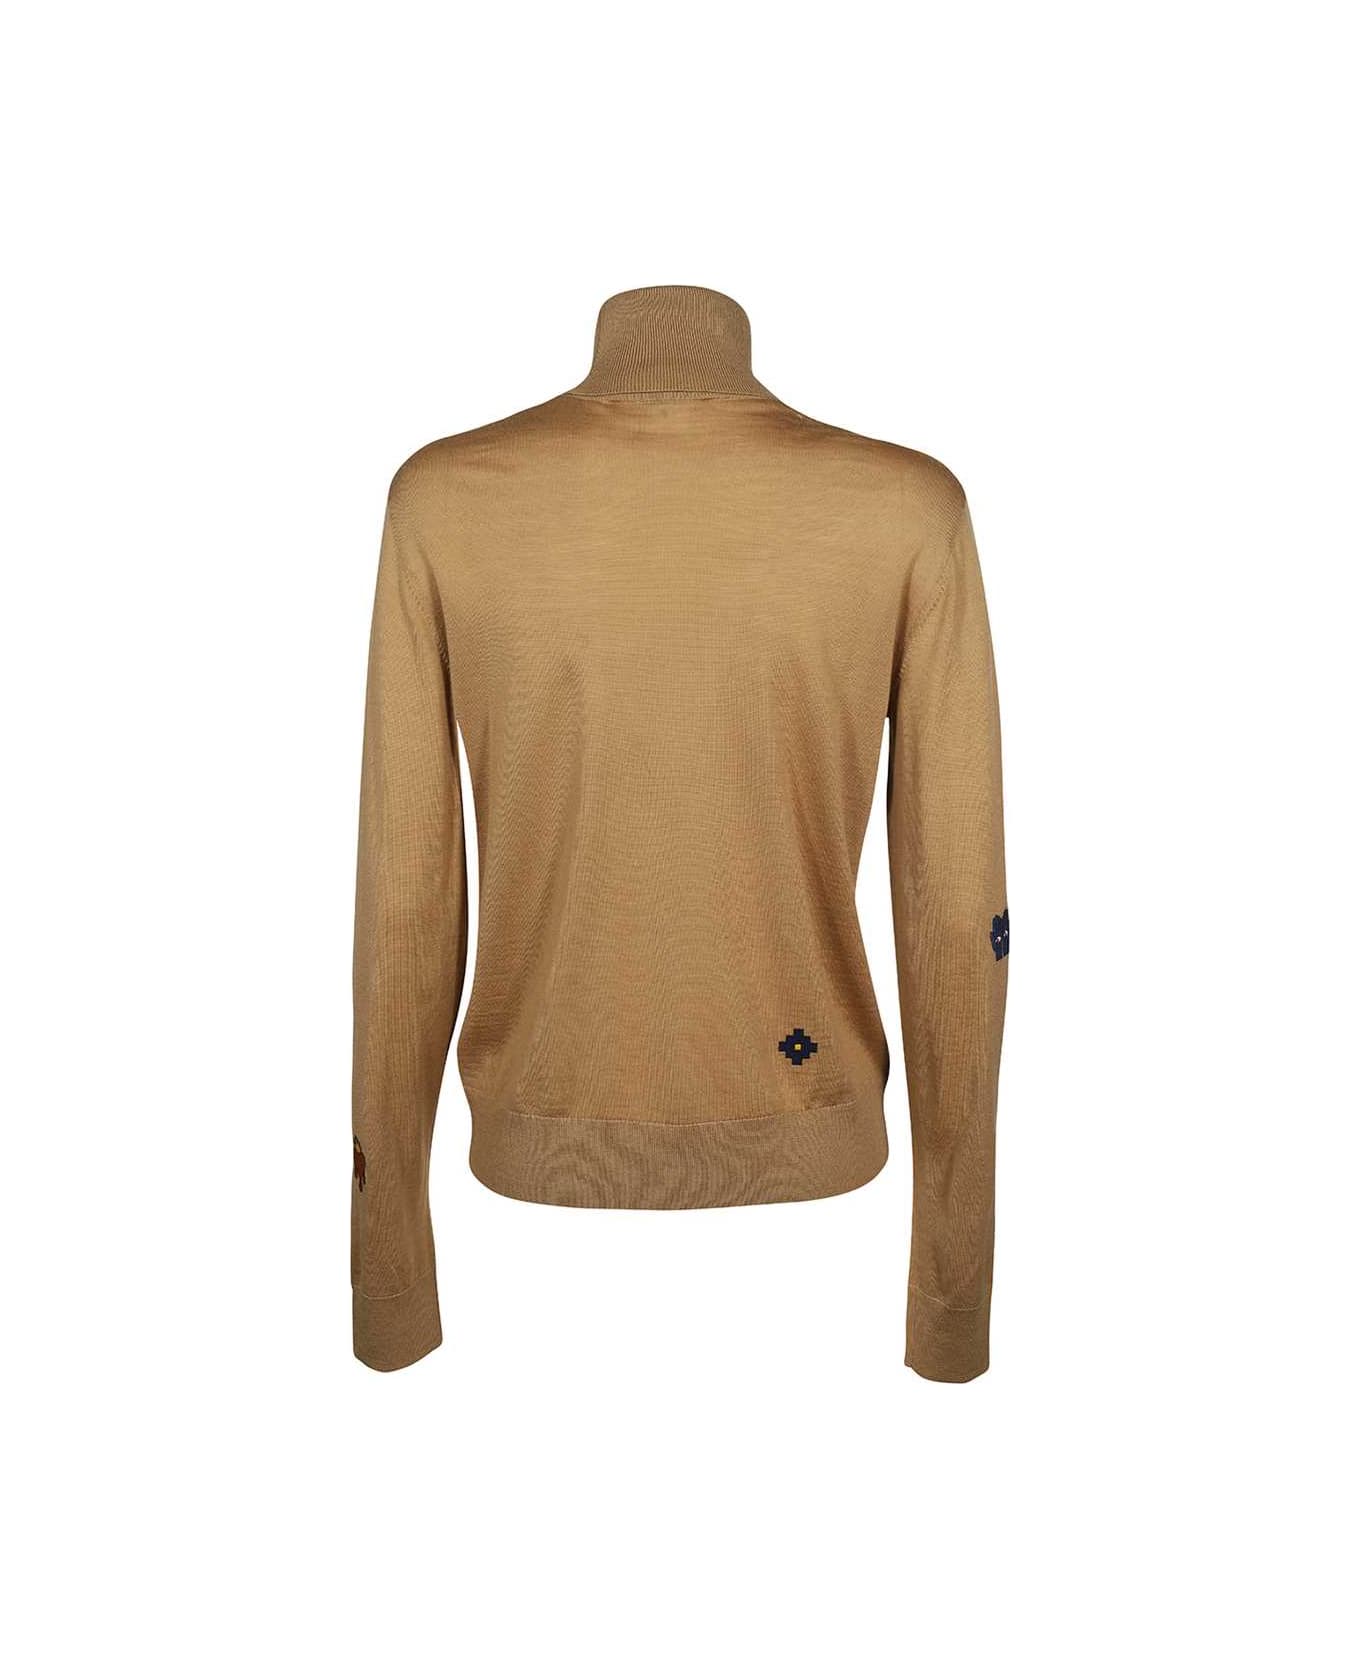 Dsquared2 Wool Sweater - Camel